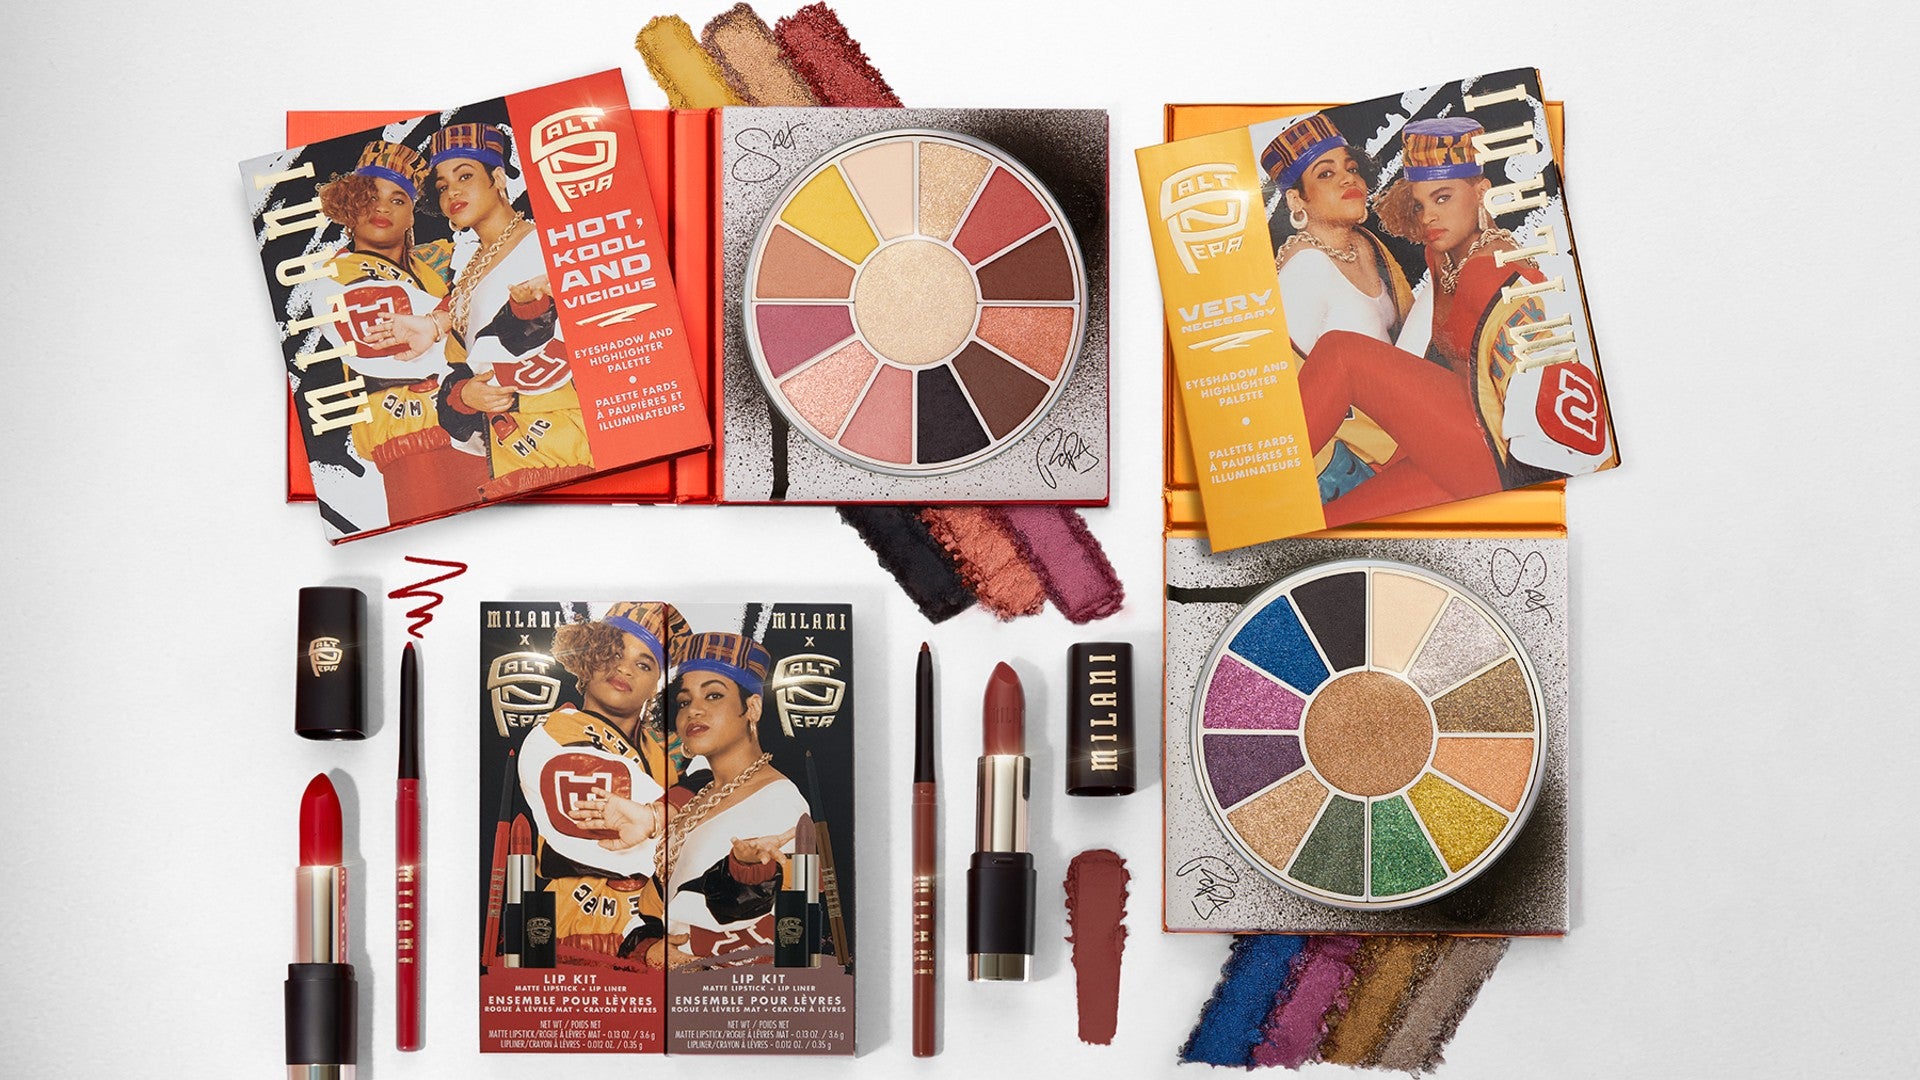 Salt-N-Pepa Launches Makeup Collection With Milani Cosmetics